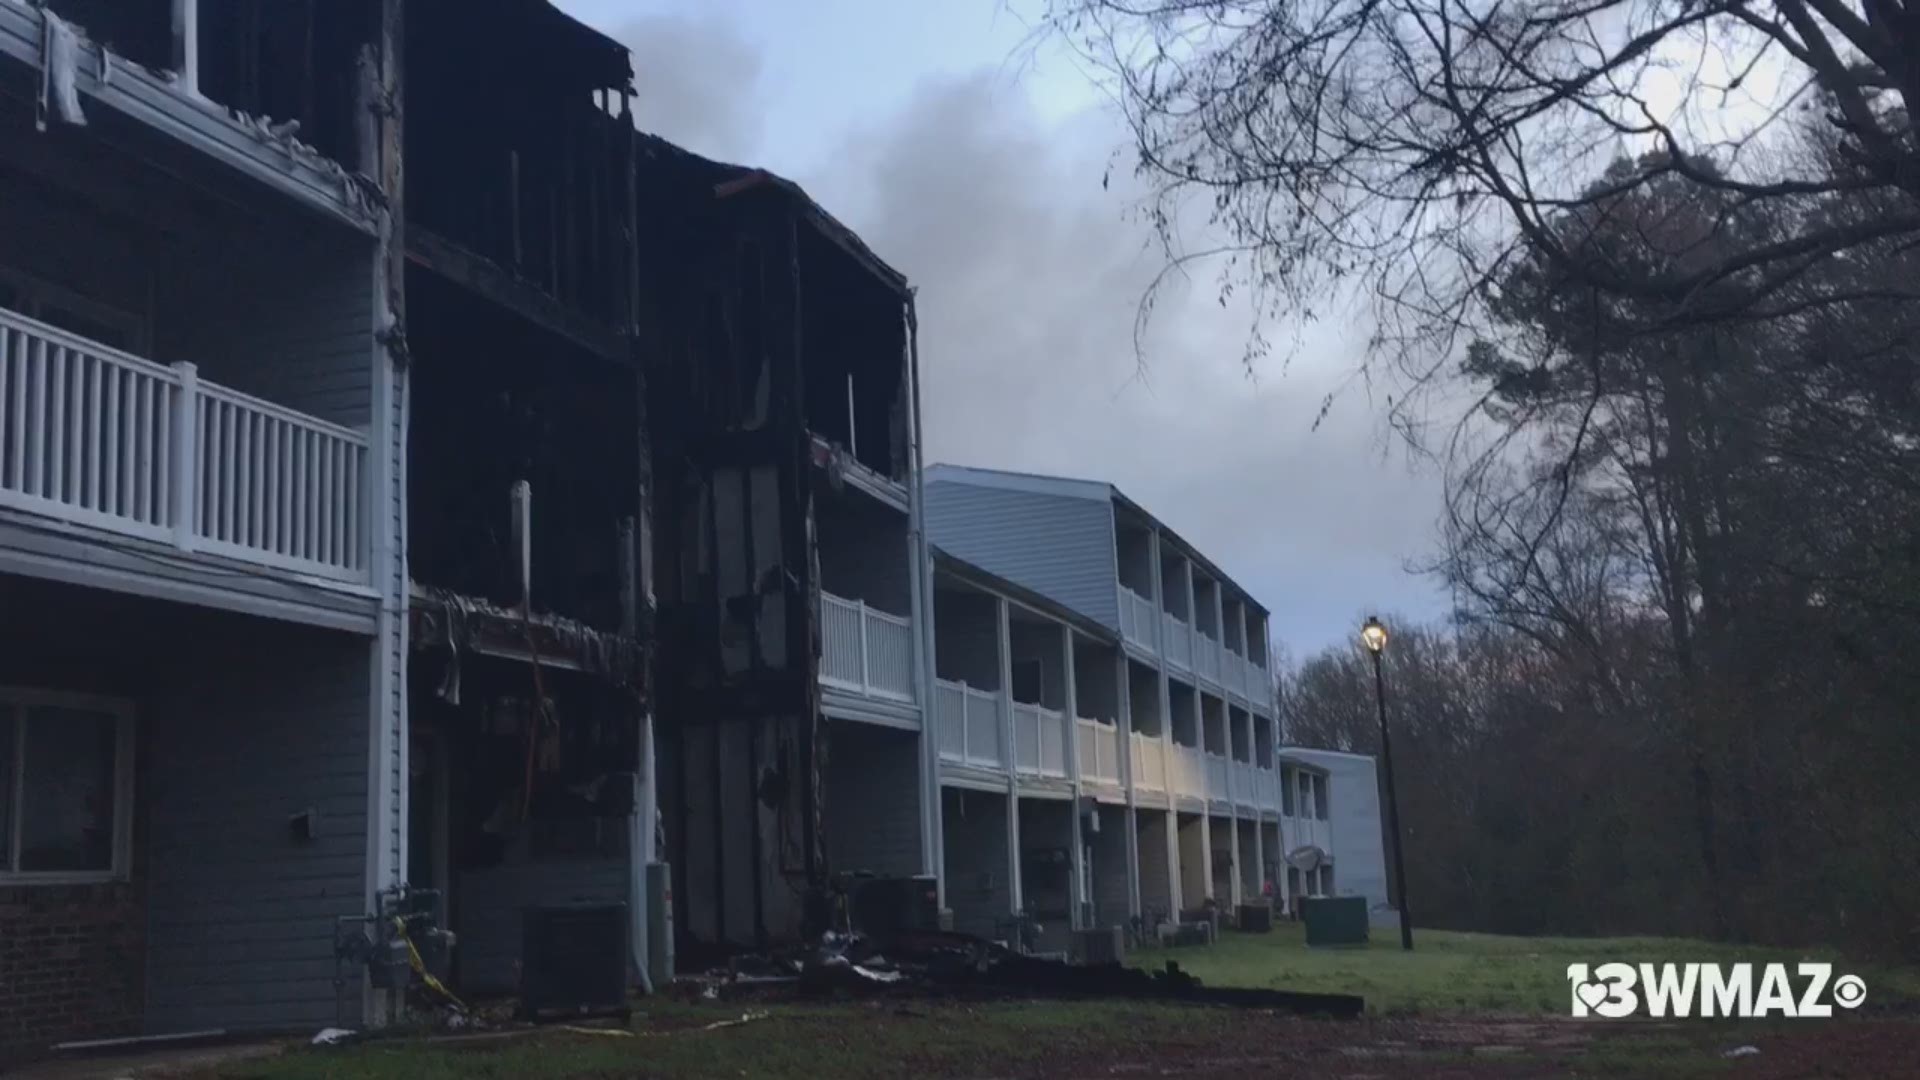 Green Meadows Townhouses on Log Cabin Drive caught fire Wednesday morning.